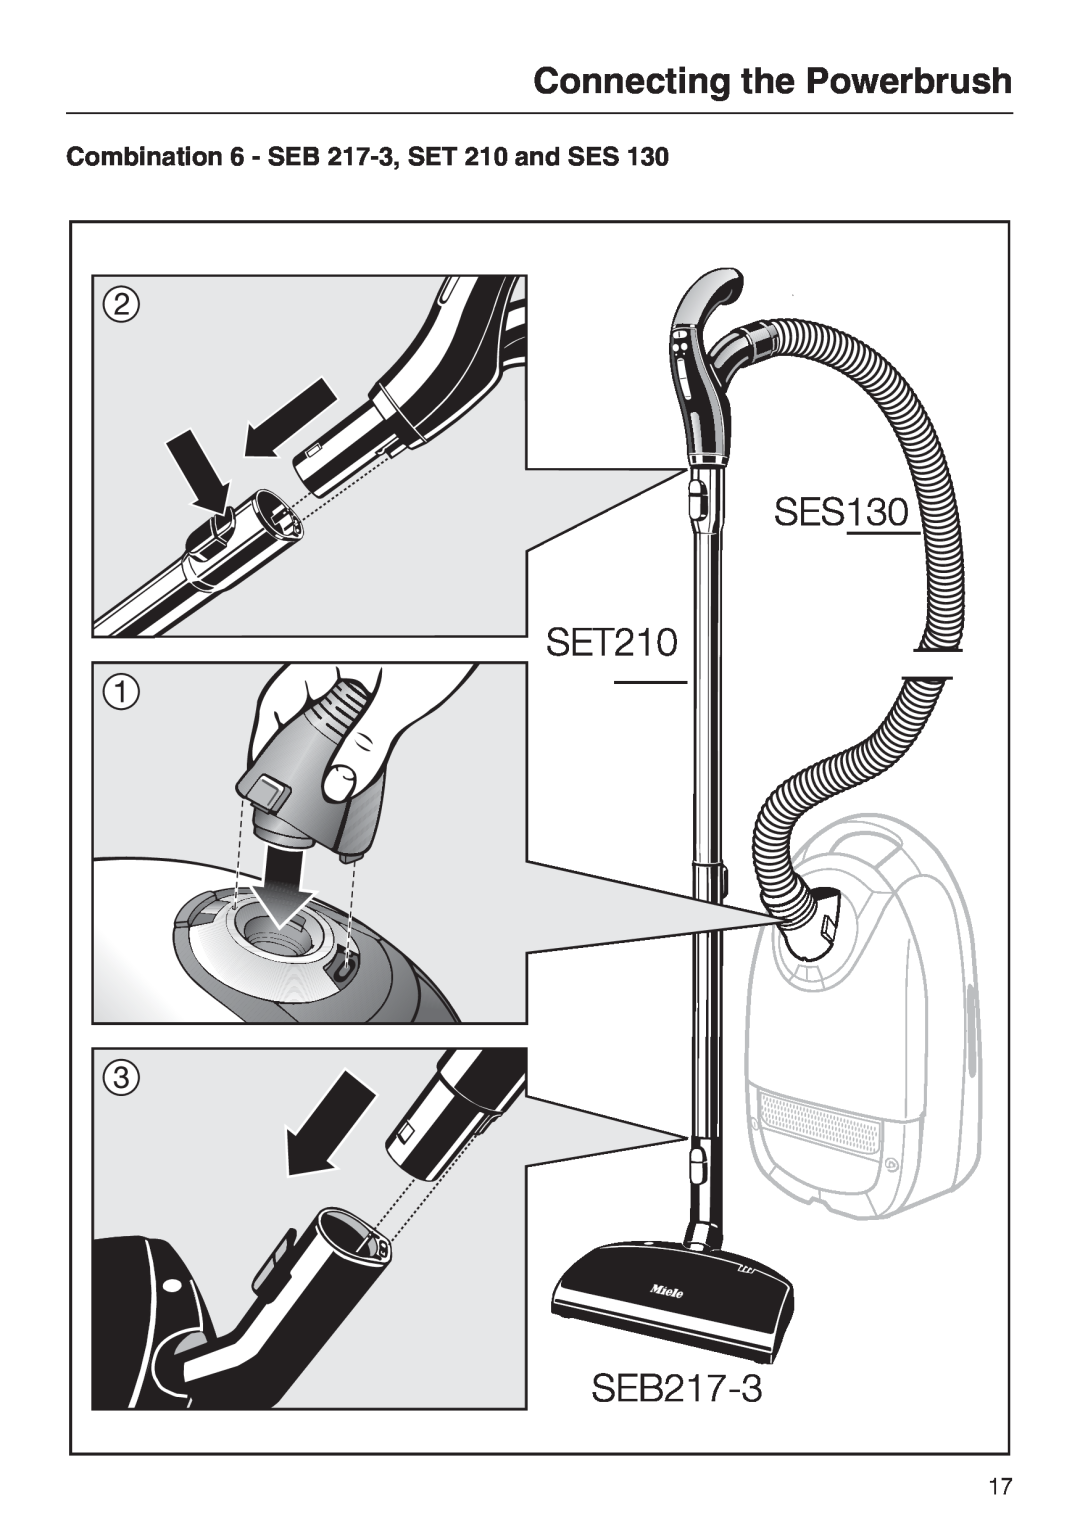 Miele 217-2, 213-2 operating instructions Connecting the Powerbrush, Combination 6 - SEB 217-3,SET 210 and SES 